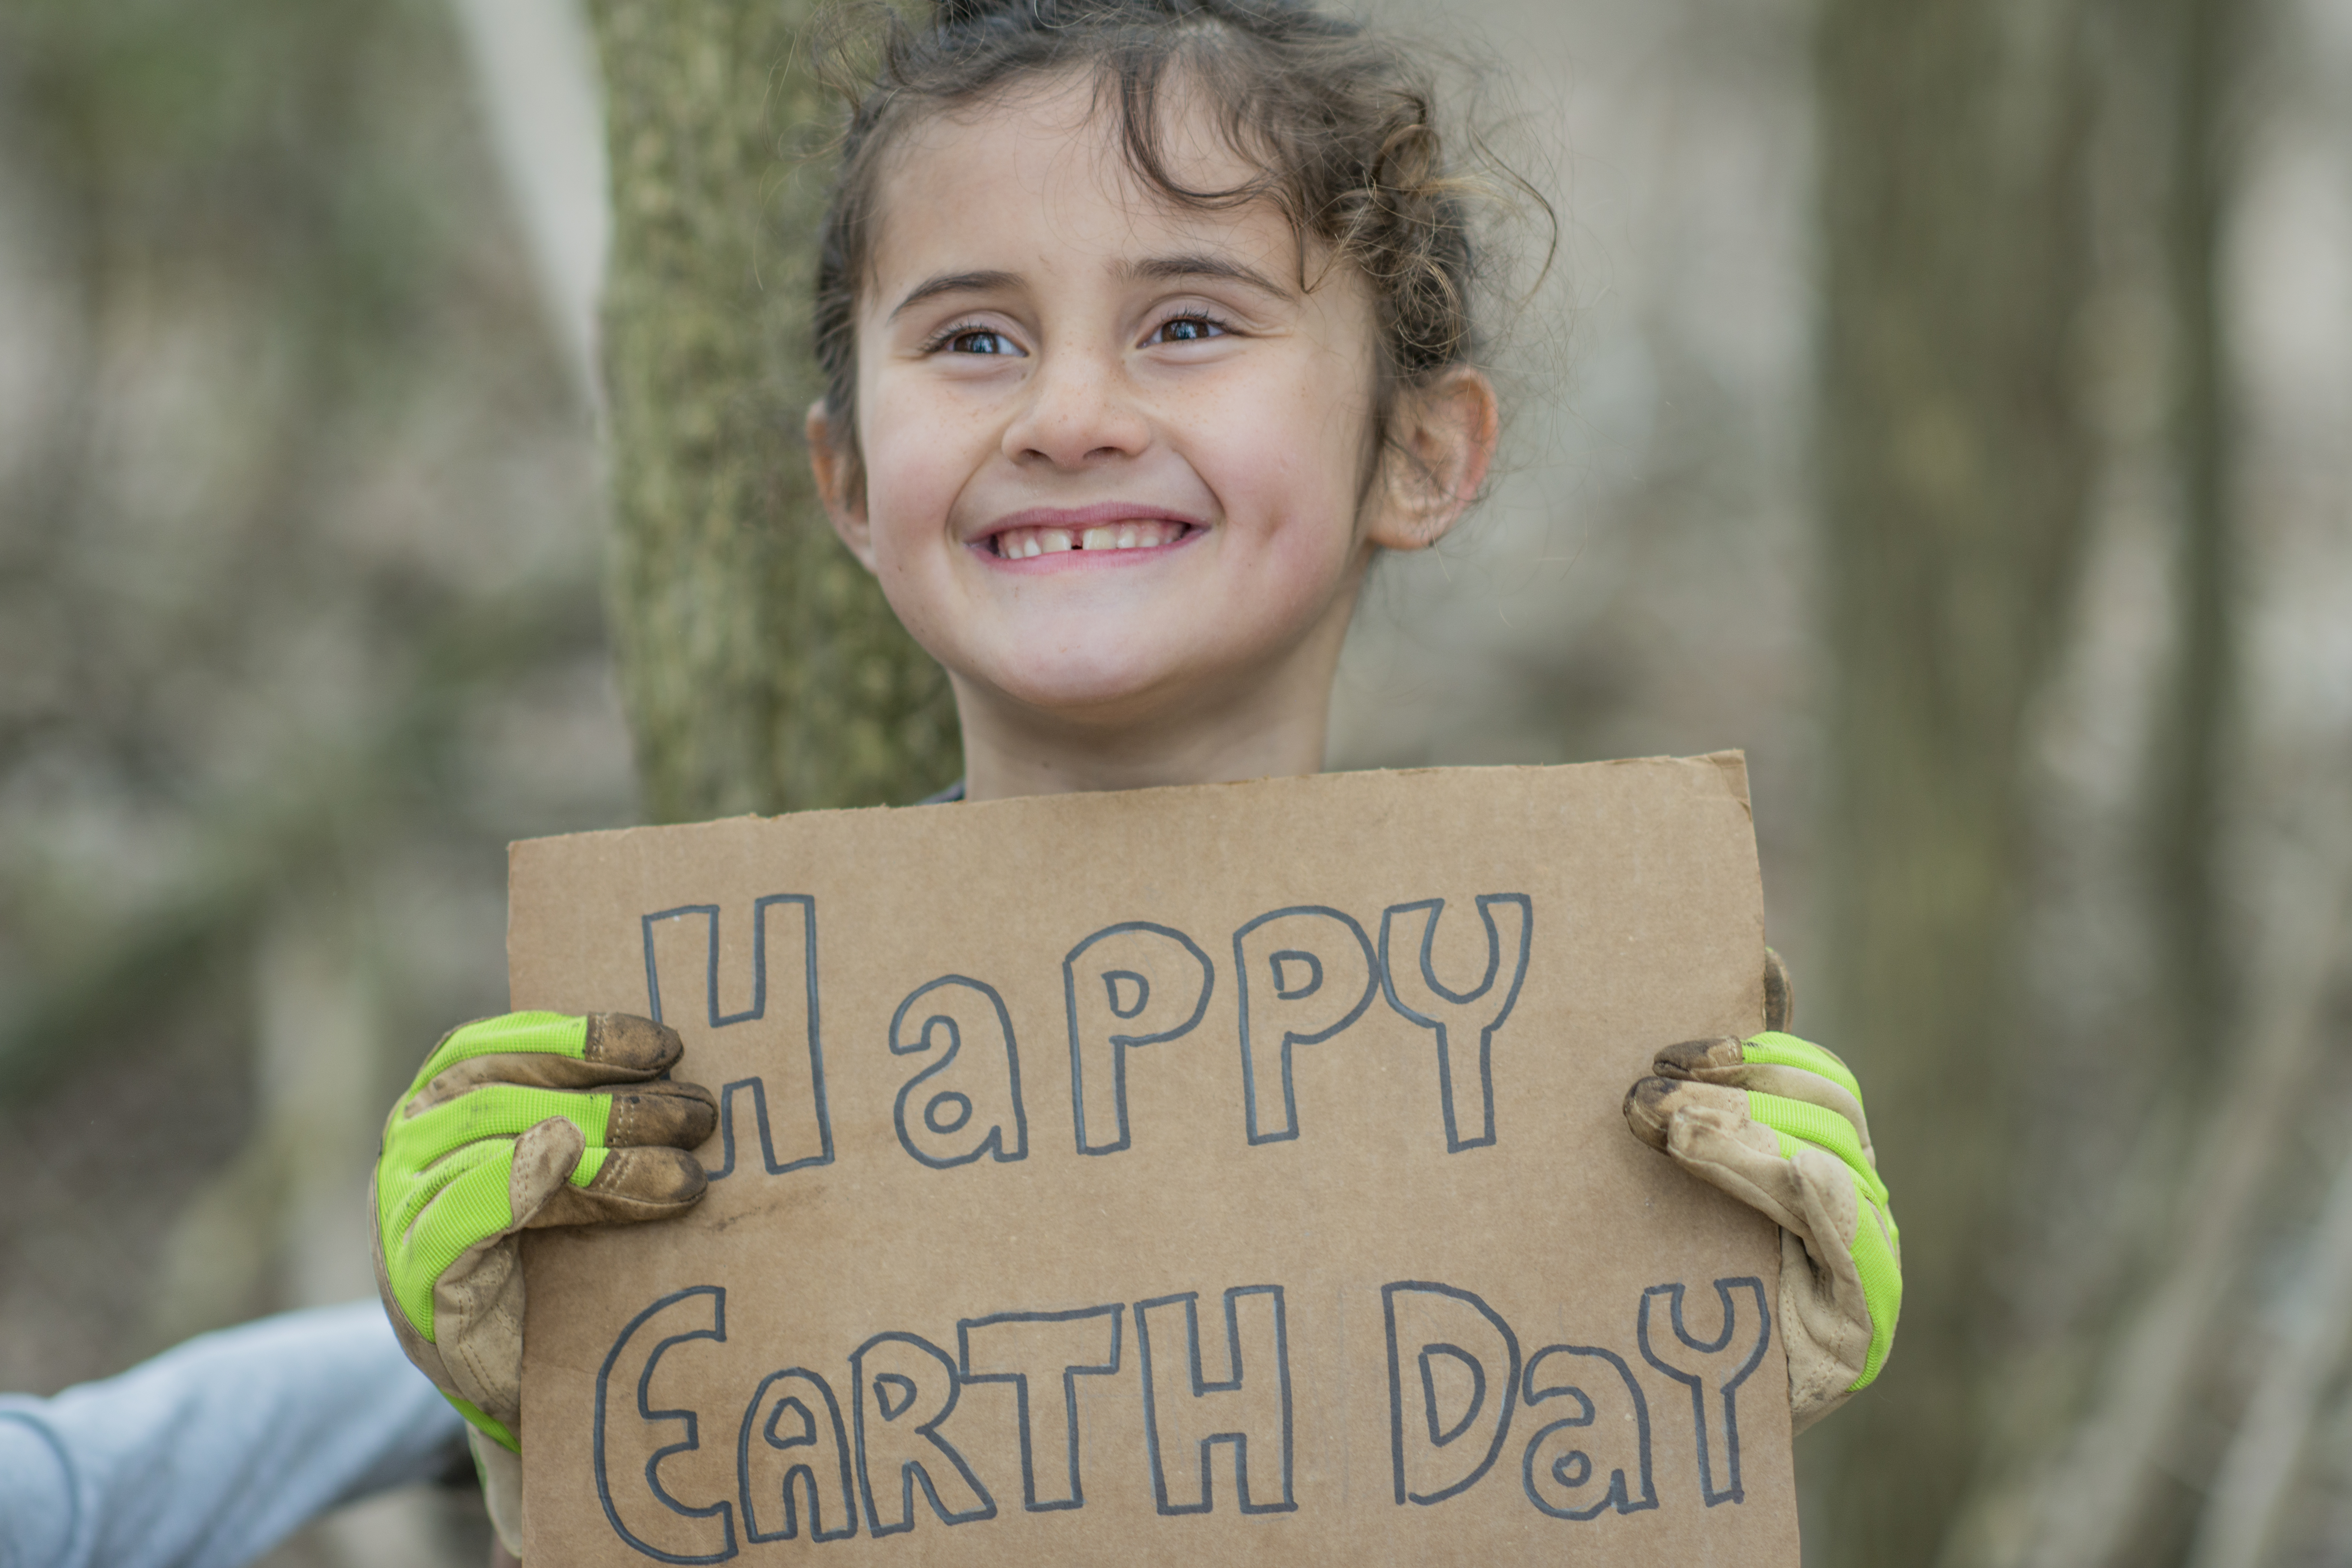 50th Anniversary of Earth Day: How to Celebrate at Home